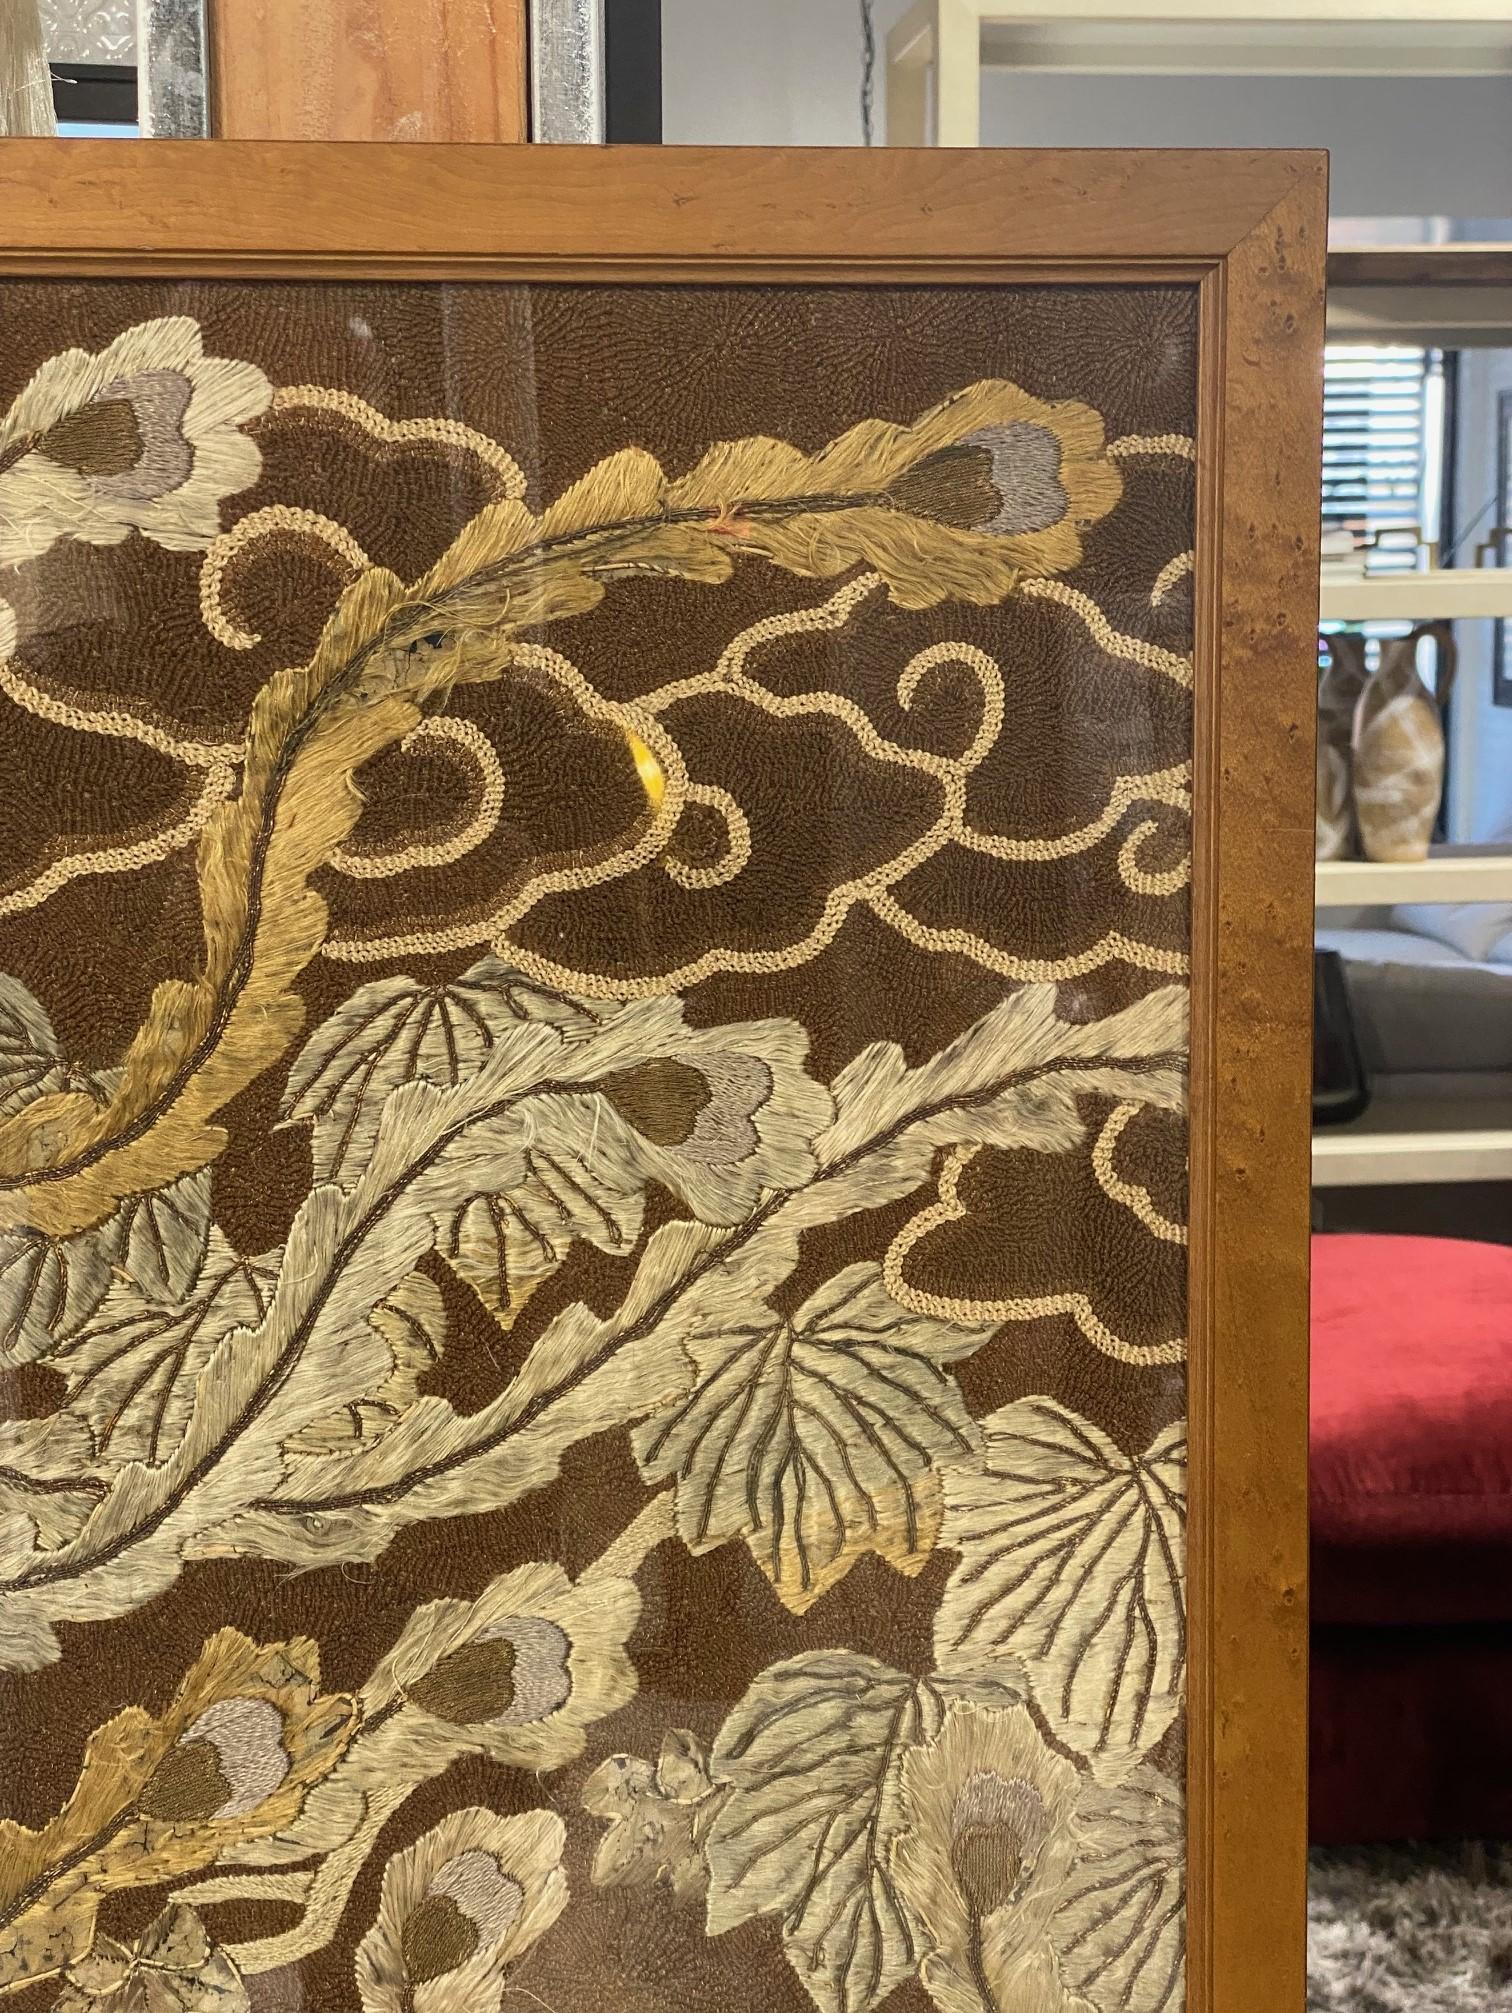 Japanese Asian Large Meiji Period Silk Embroidery Peacock Bird Flower Tapestry In Good Condition For Sale In Studio City, CA